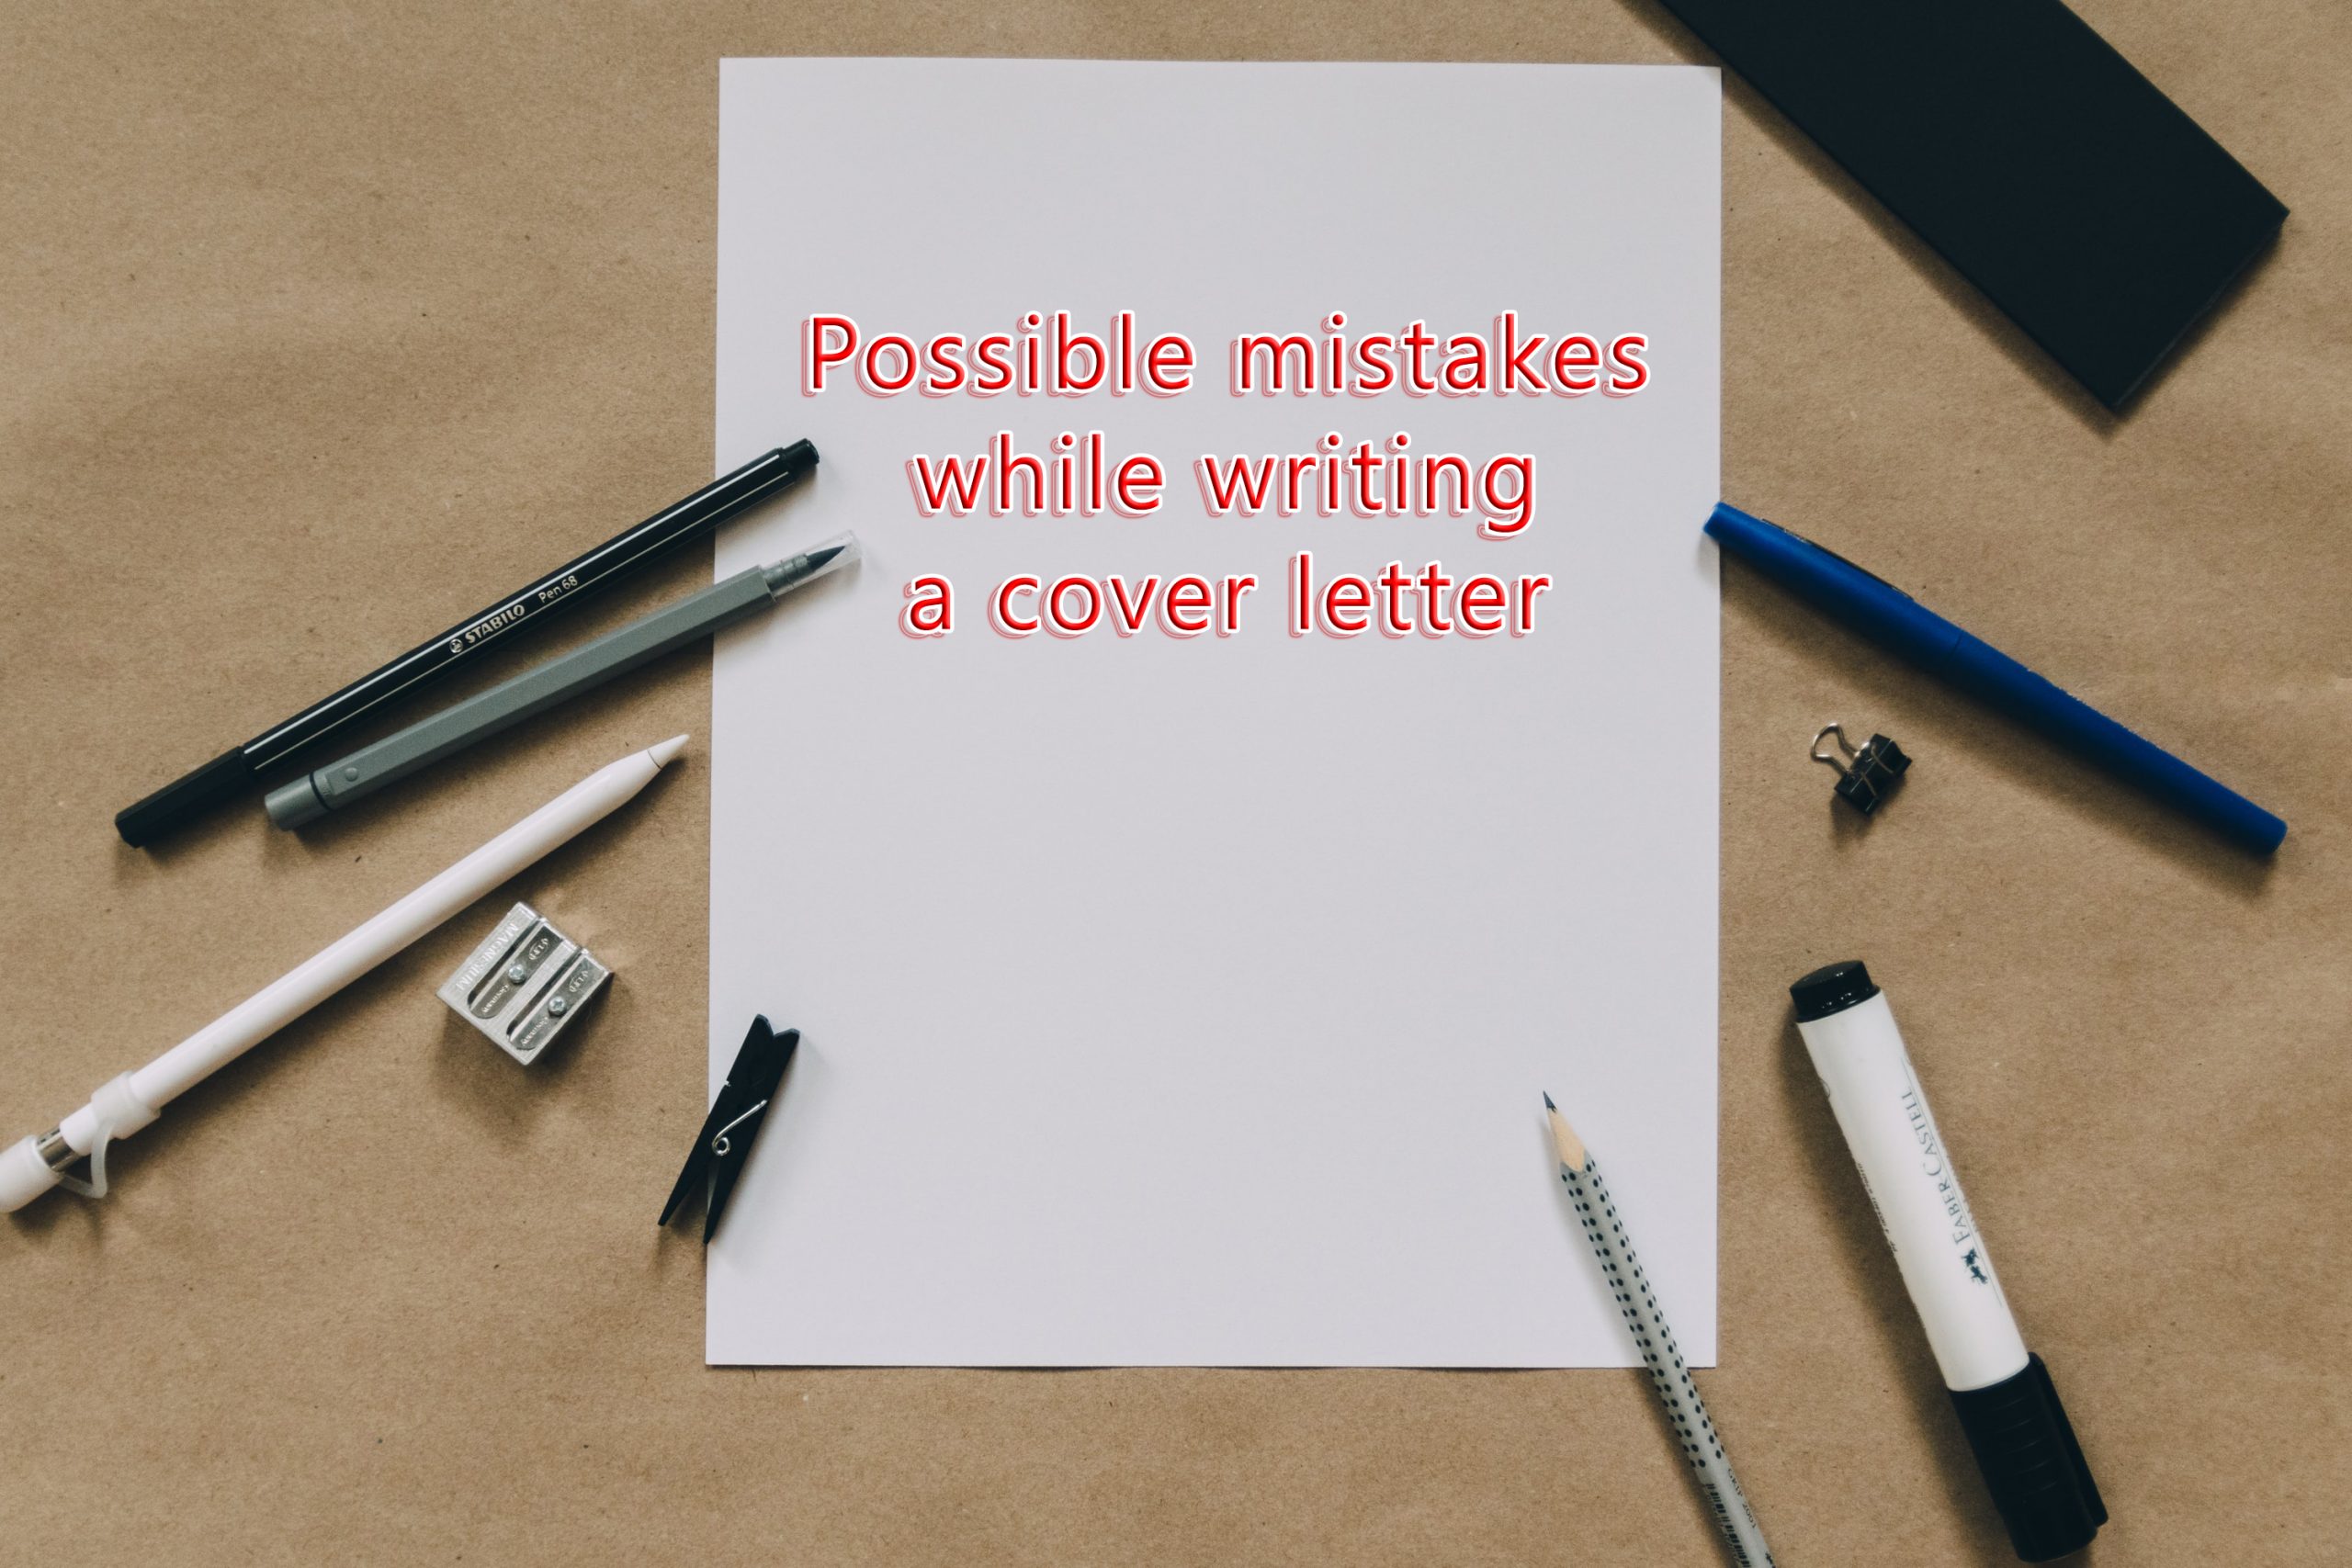 Possible mistakes while writing a cover letter